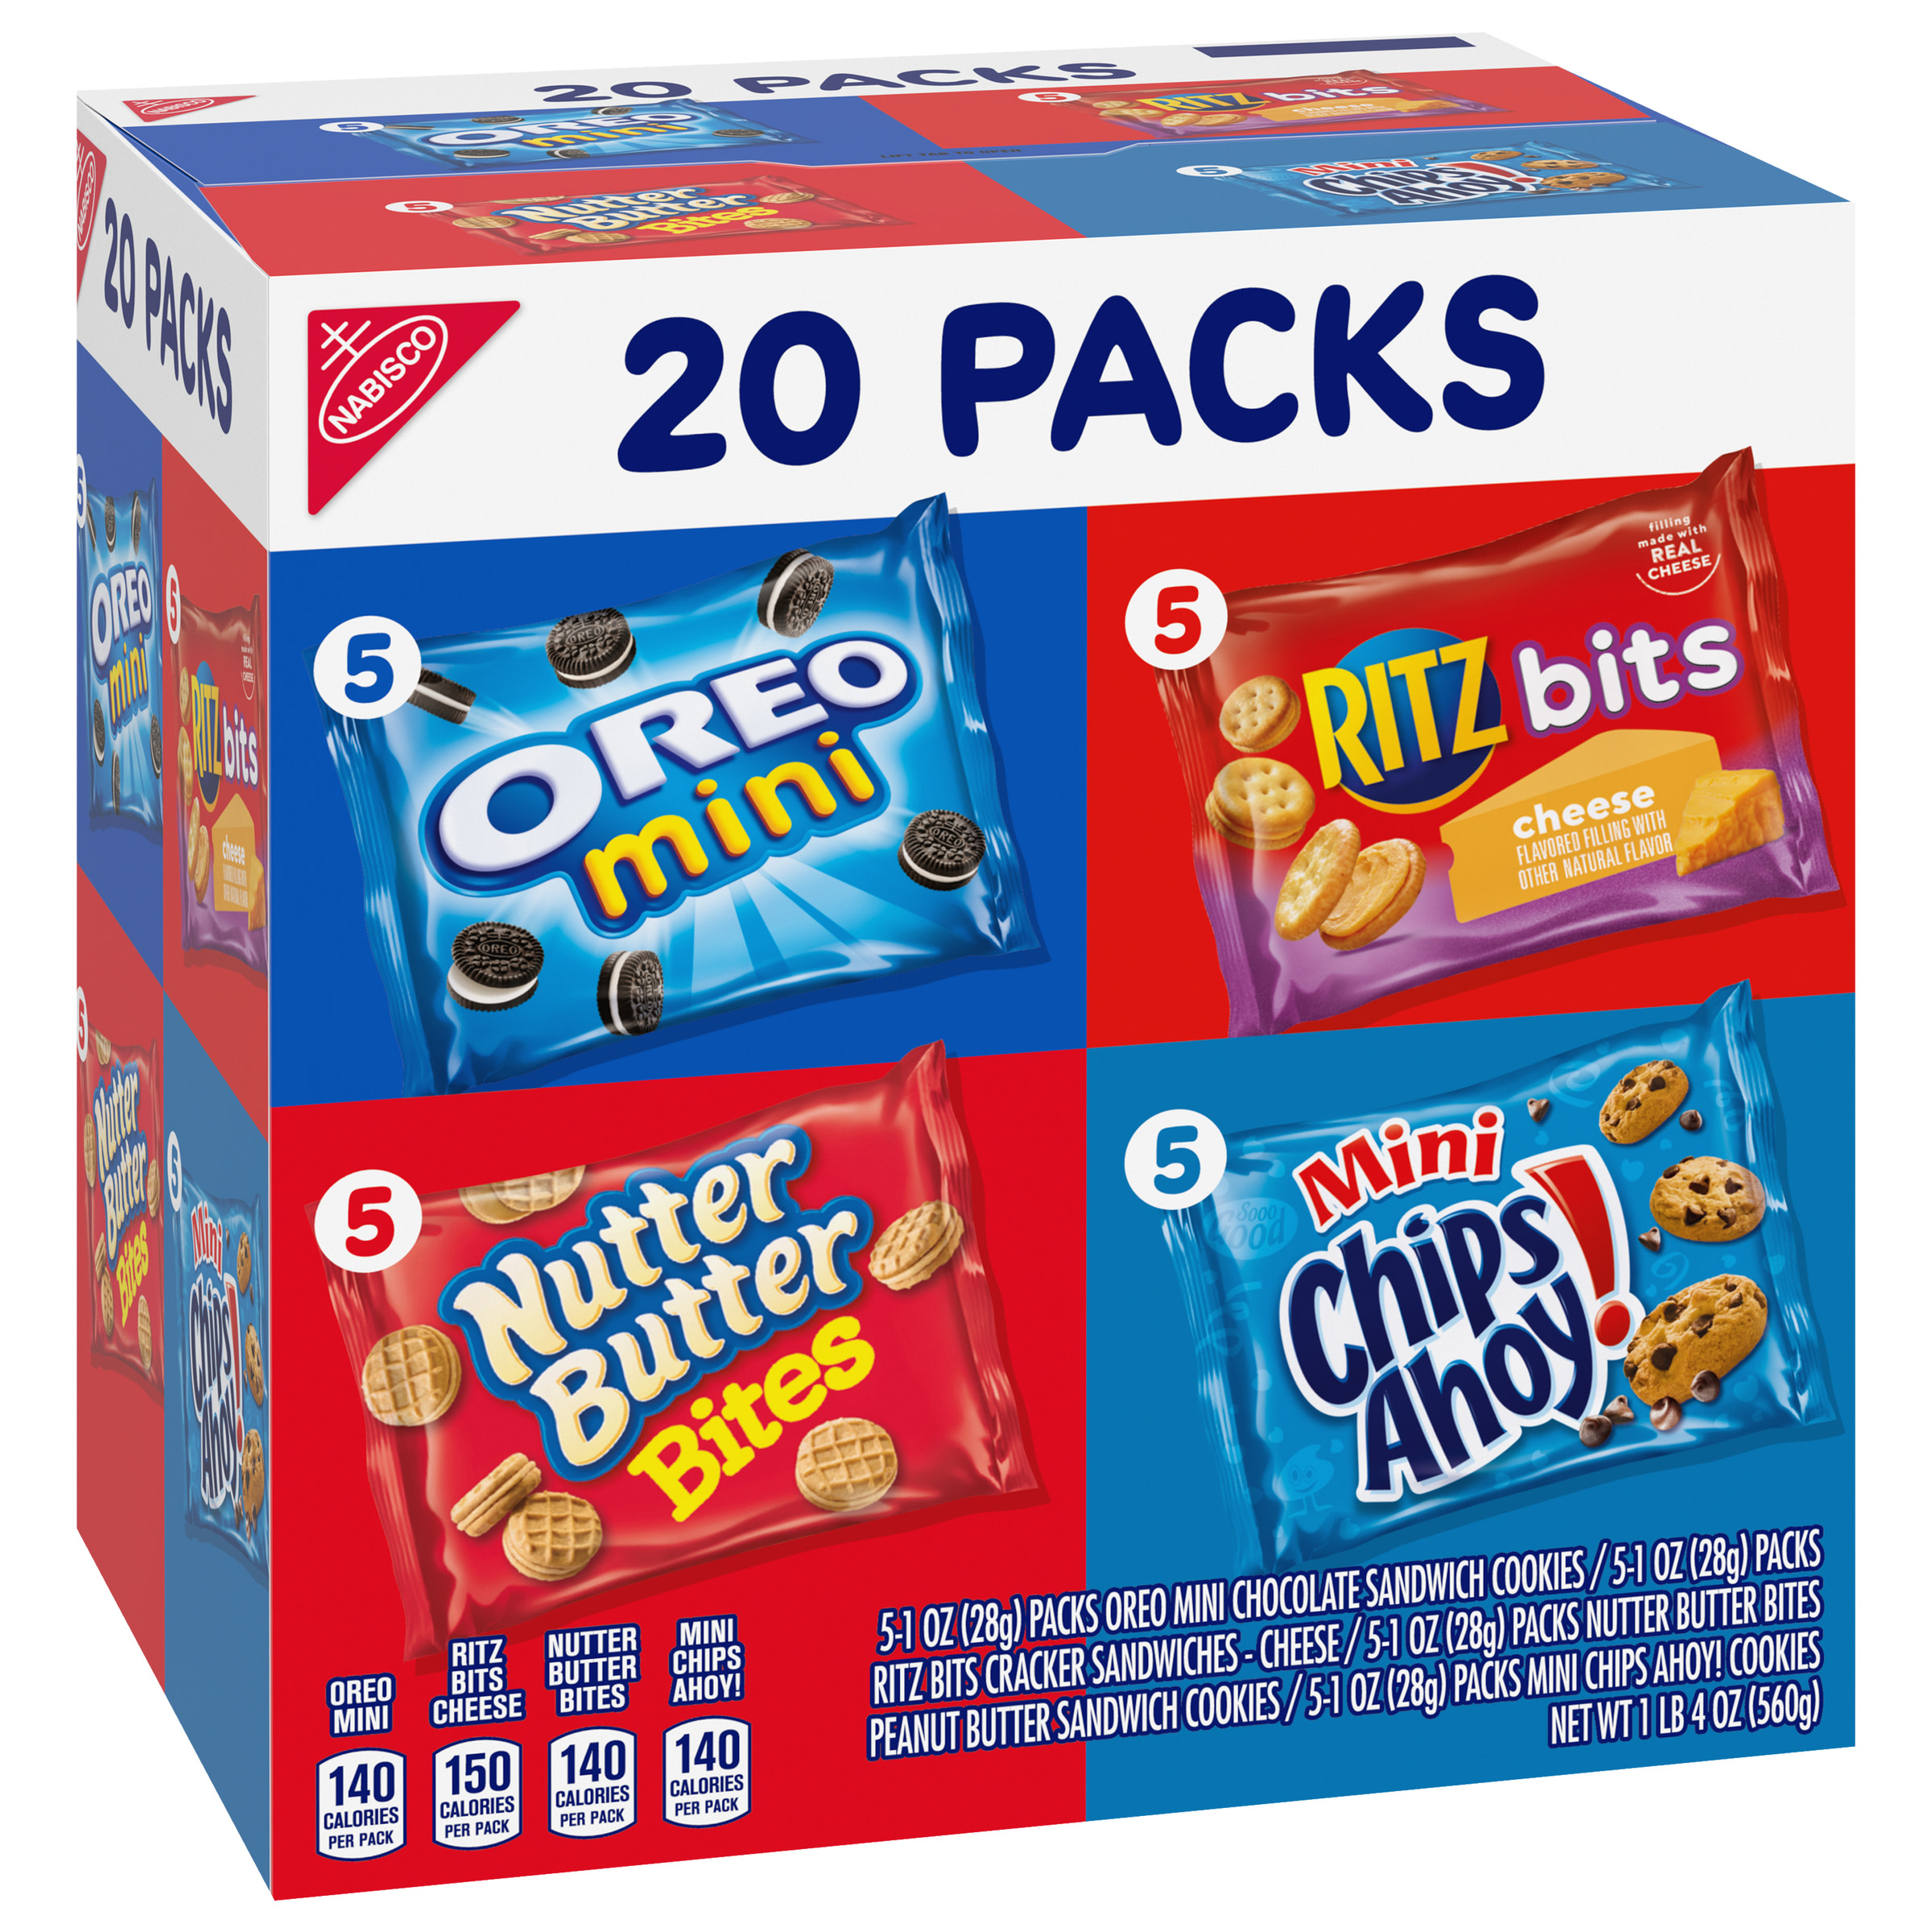 Nabisco Classic Mix Variety Pack, OREO Mini, CHIPS AHOY! Mini, Nutter Butter Bites, RITZ Bits Cheese, Easter Snacks, 20 Snack Packs - image 2 of 12